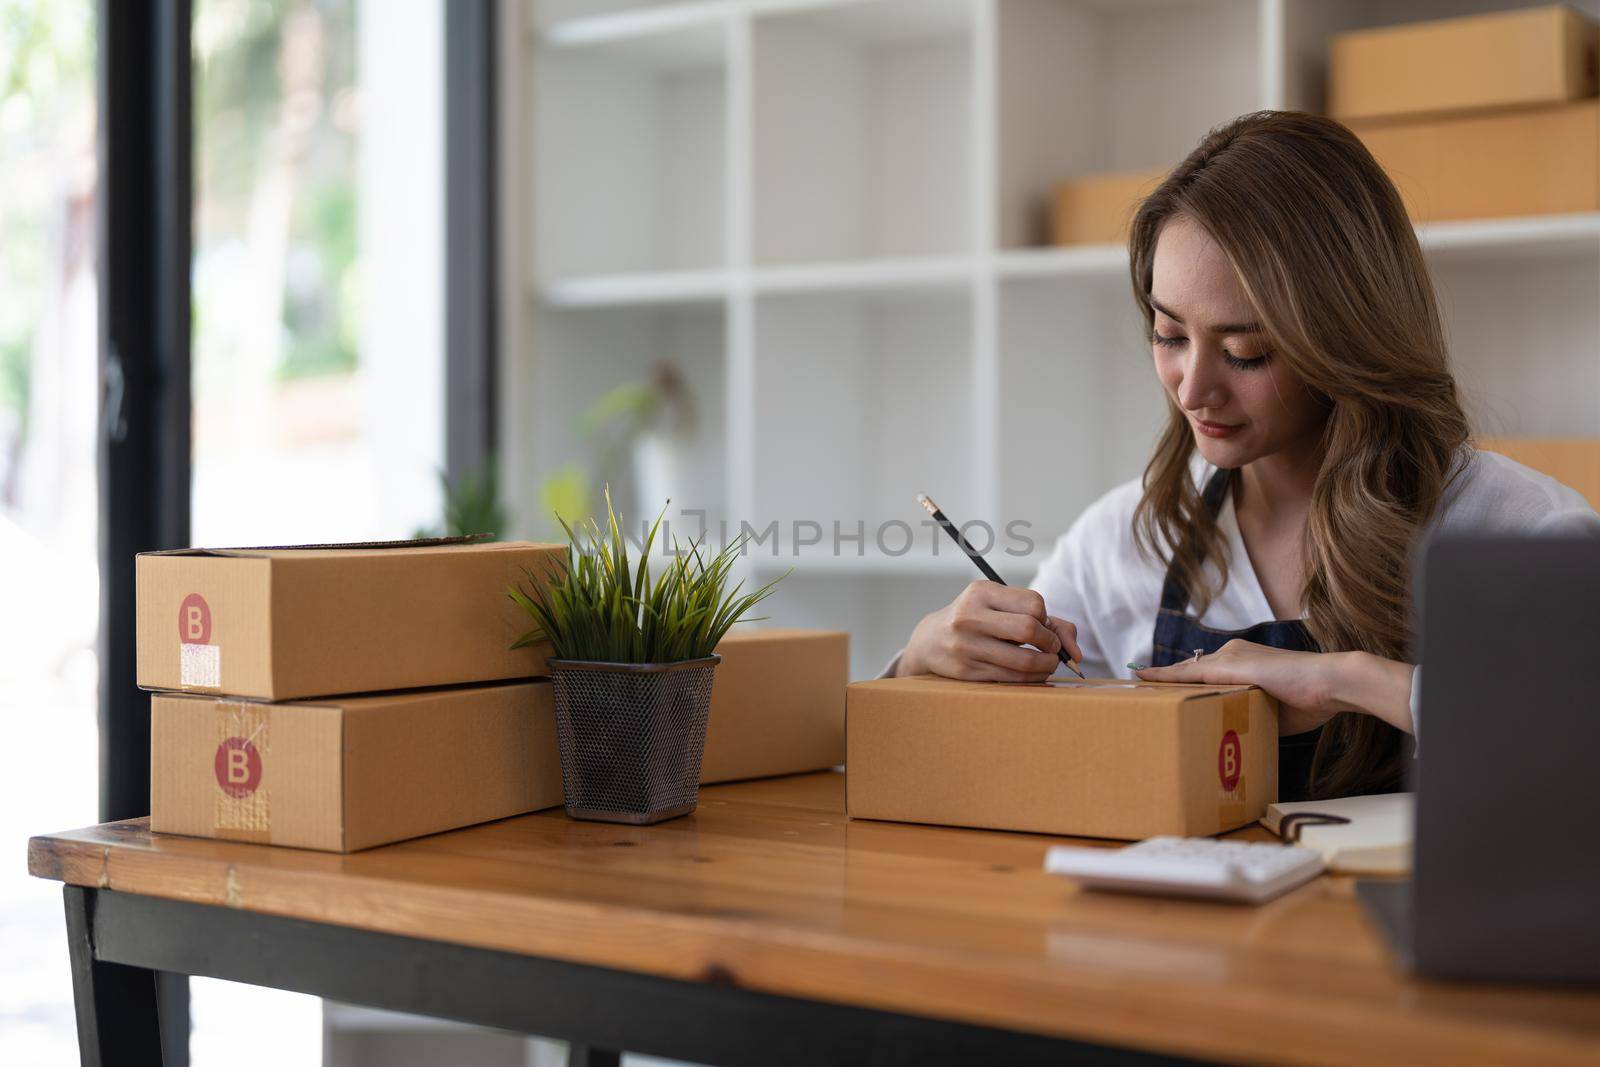 Starting Small business entrepreneur SME freelance, Portrait young woman working at home office, BOX, smartphone, laptop, online, marketing, packaging, delivery, b2b, SME, e-commerce concept.. by nateemee